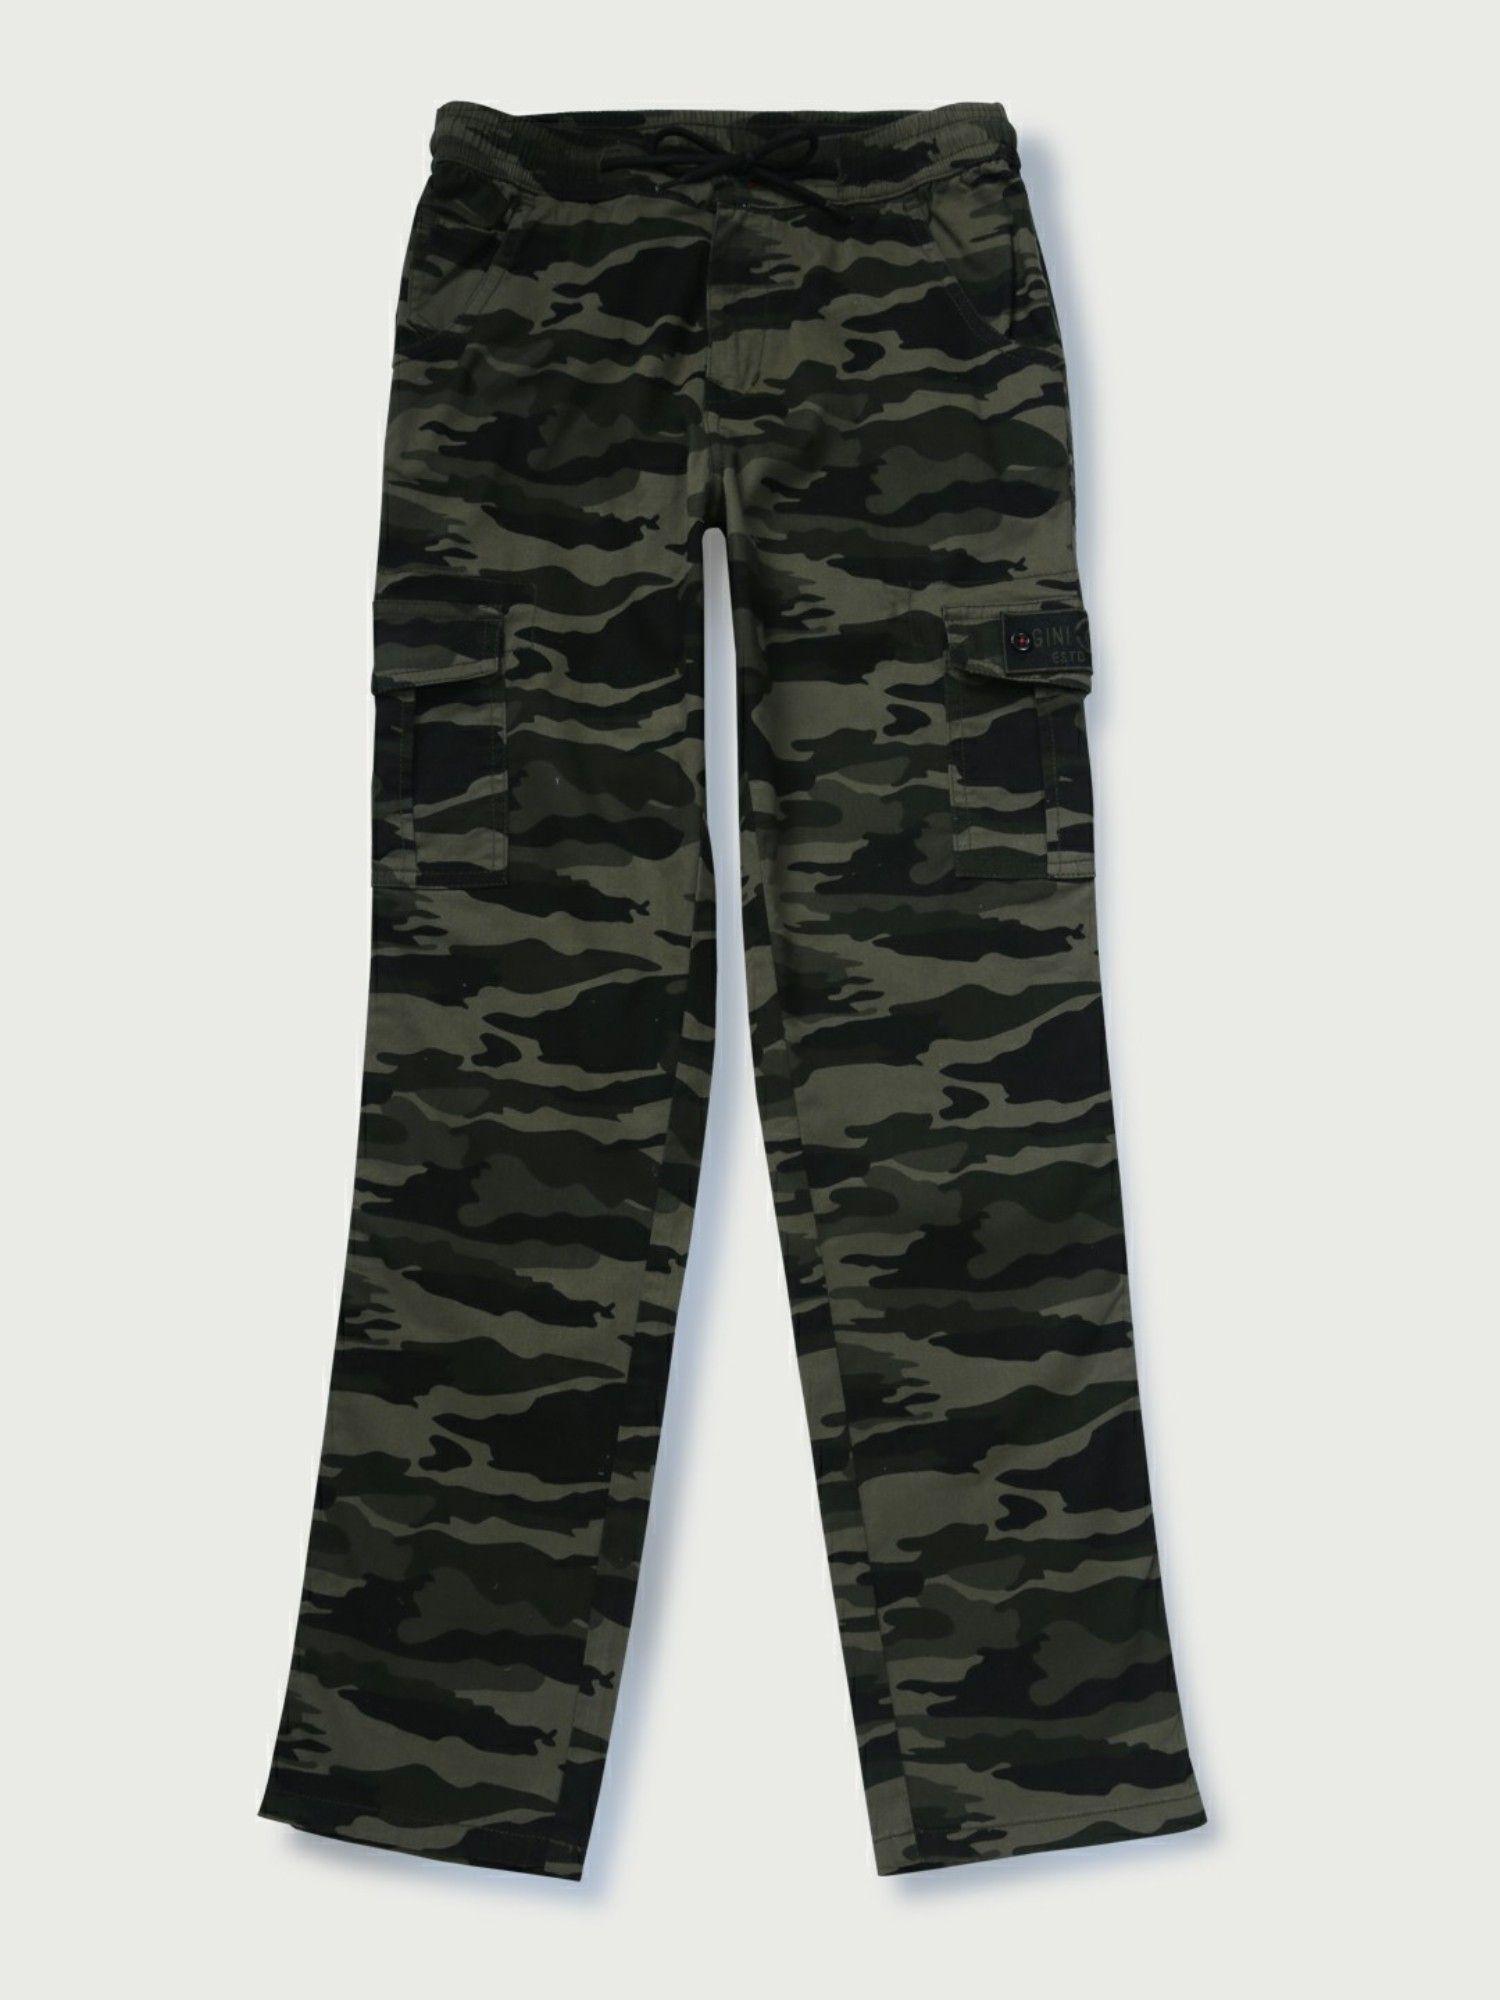 Boys Olive Cotton Camouflage Trouser